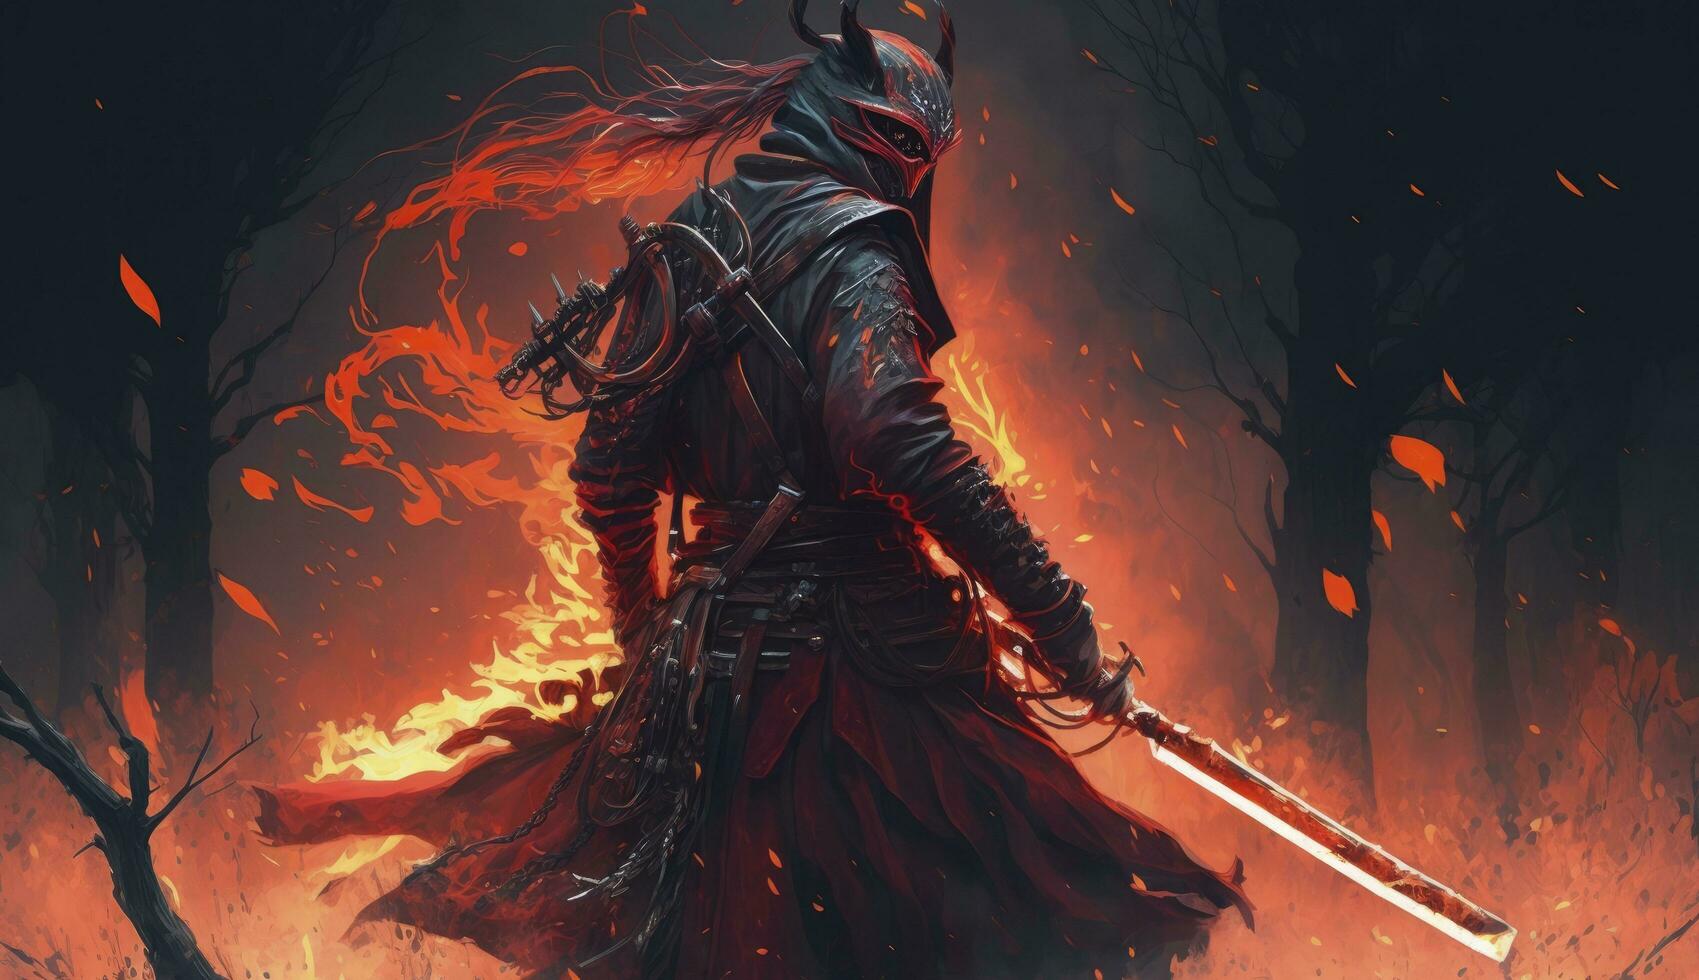 A samurai in a demonic red mask on the battlefield makes a swing with a katana creating a sizzling fire ring around, he is a mystical martial. illustration painting, Generate Ai photo